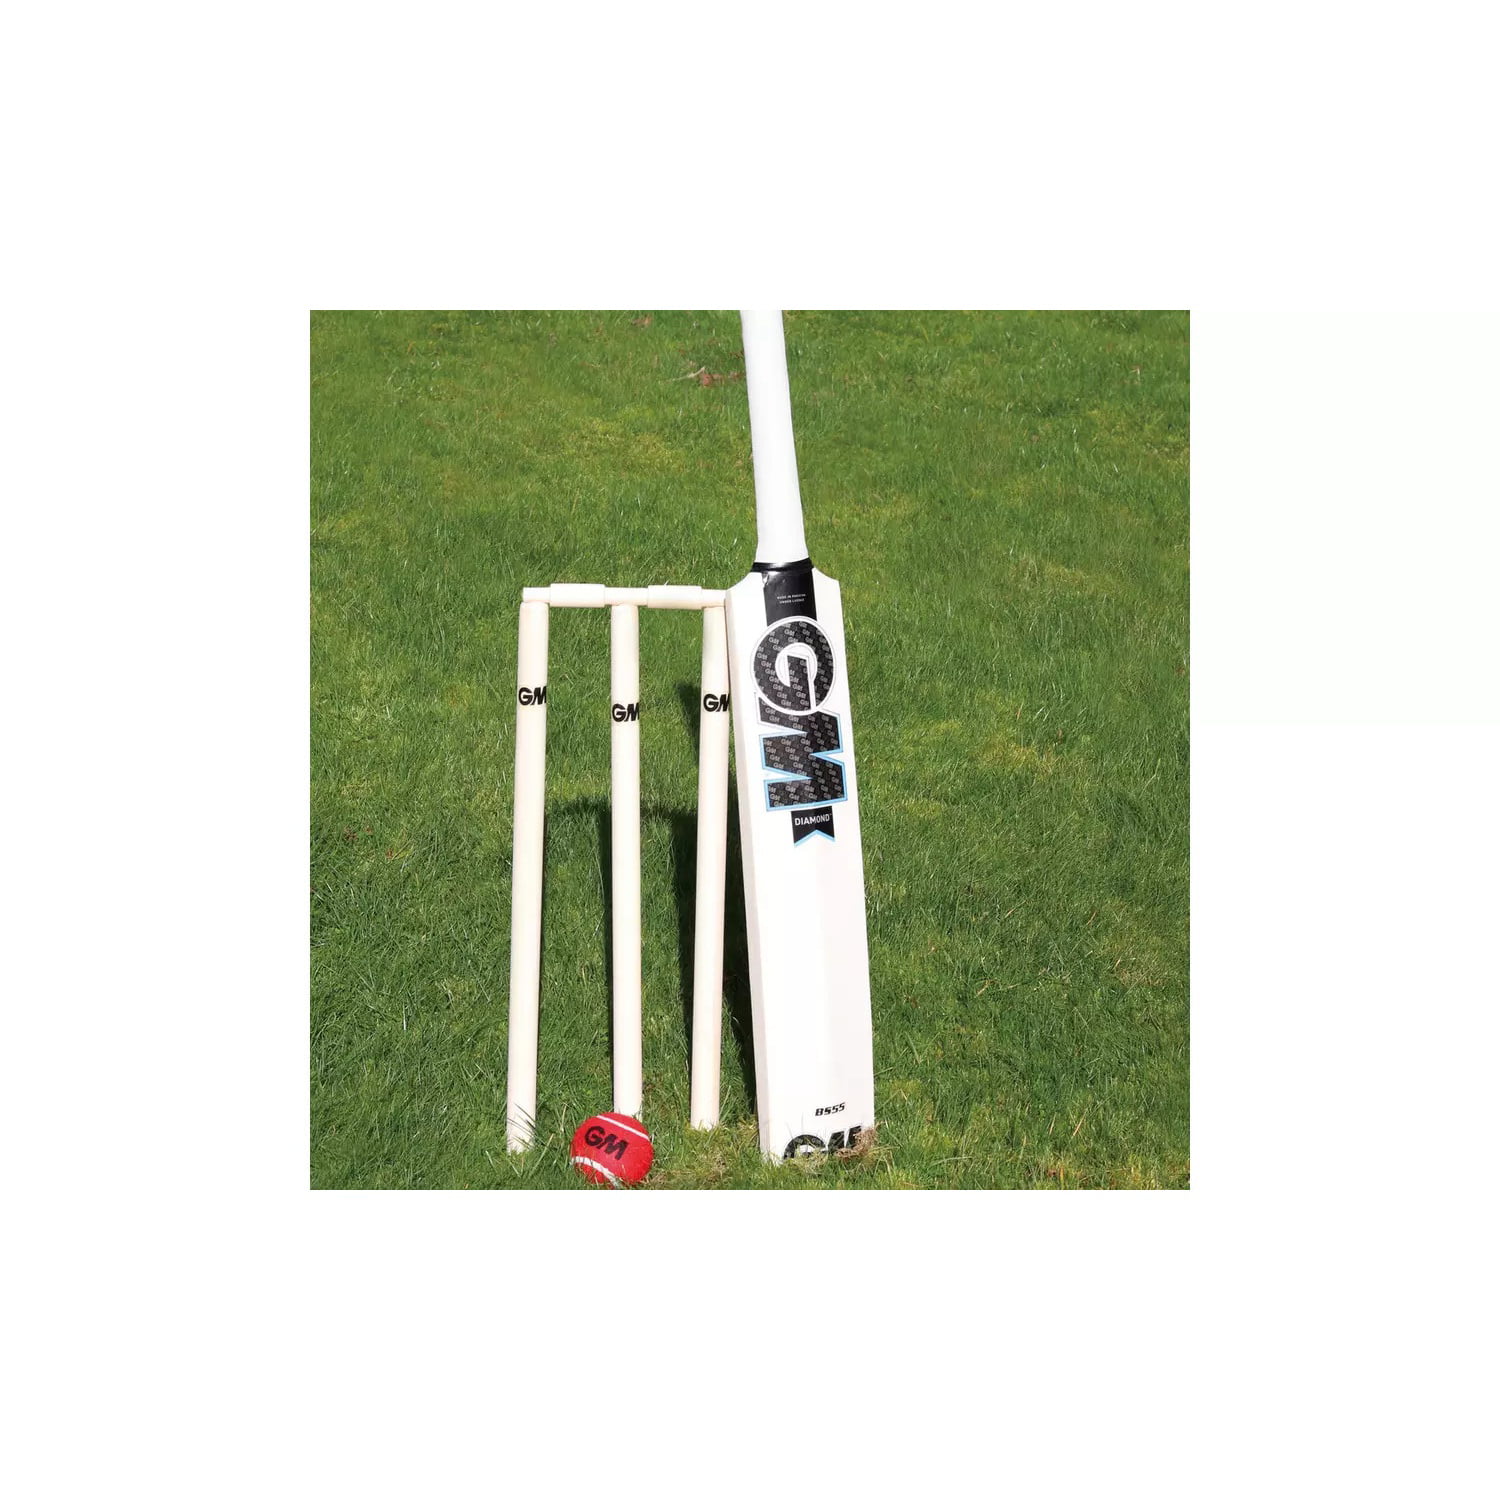 NEW Size 5 for kids 7-17 Perfect for garden & holiday fun Deluxe Cricket Set 